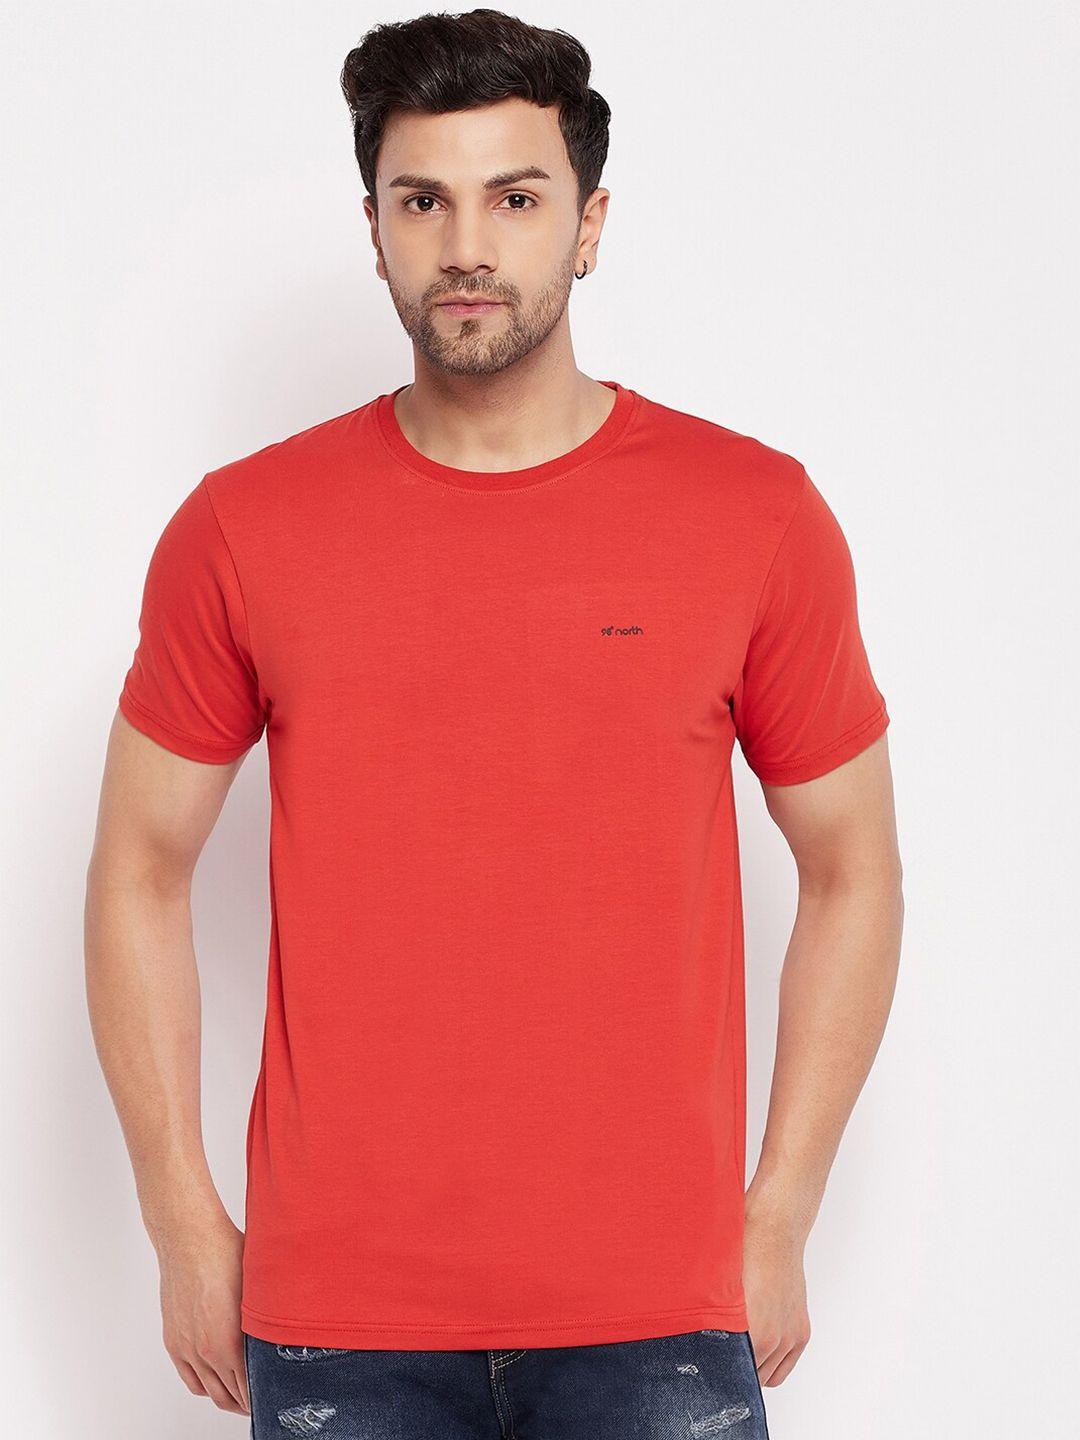 98 degree north round neck cotton casual t-shirt